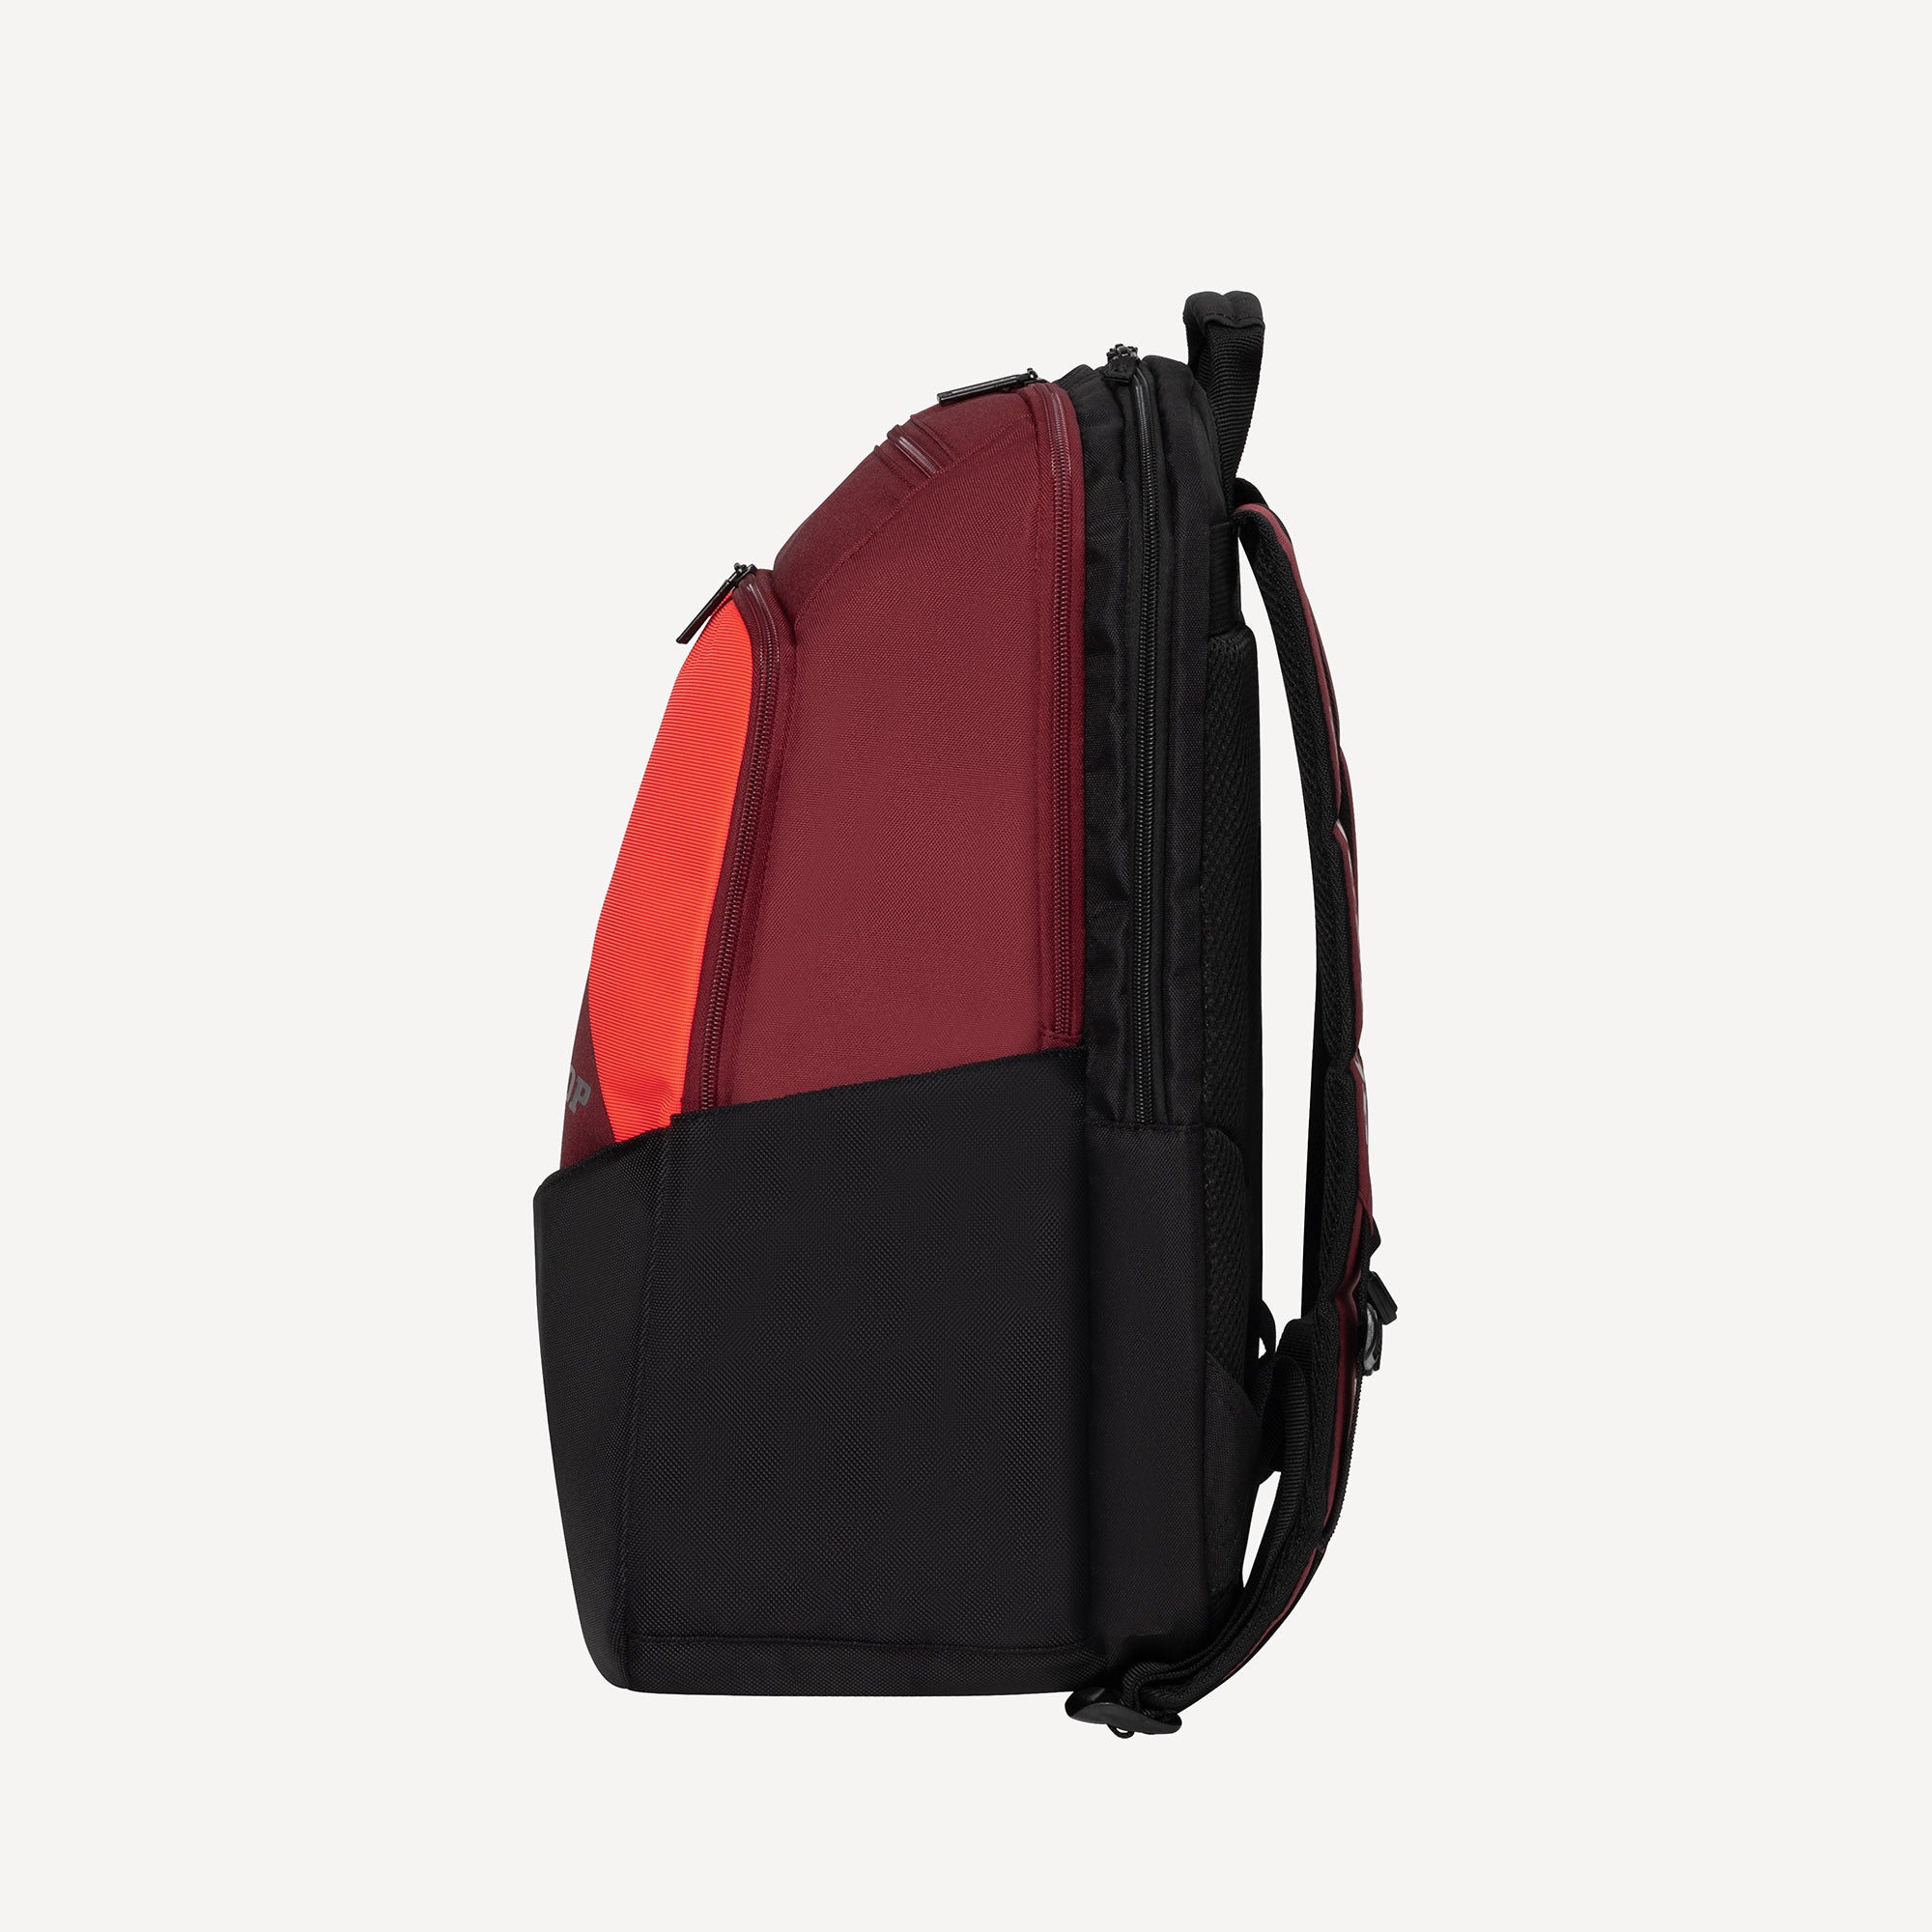 Dunlop CX Performance Tennis Backpack - Red (3)